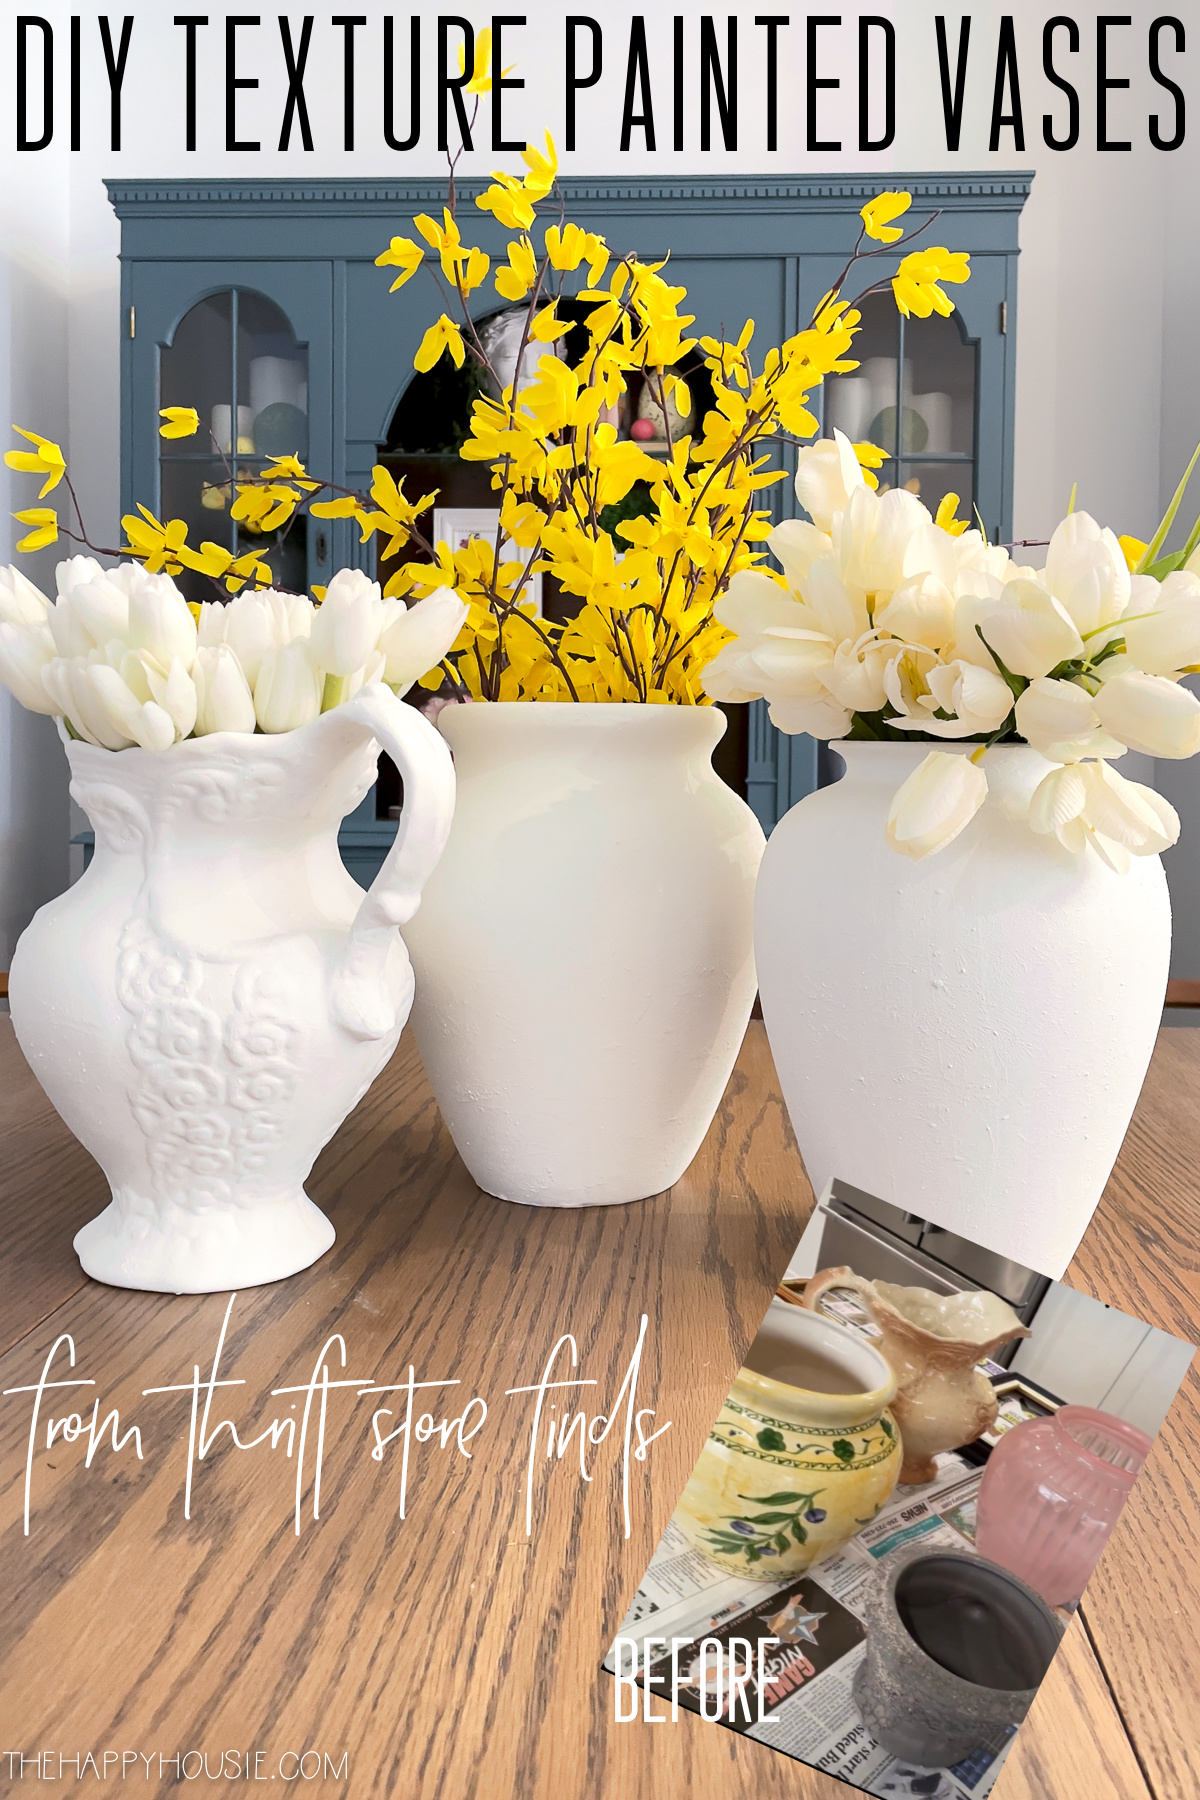 DIY texture painted vases made from thrift store find vases